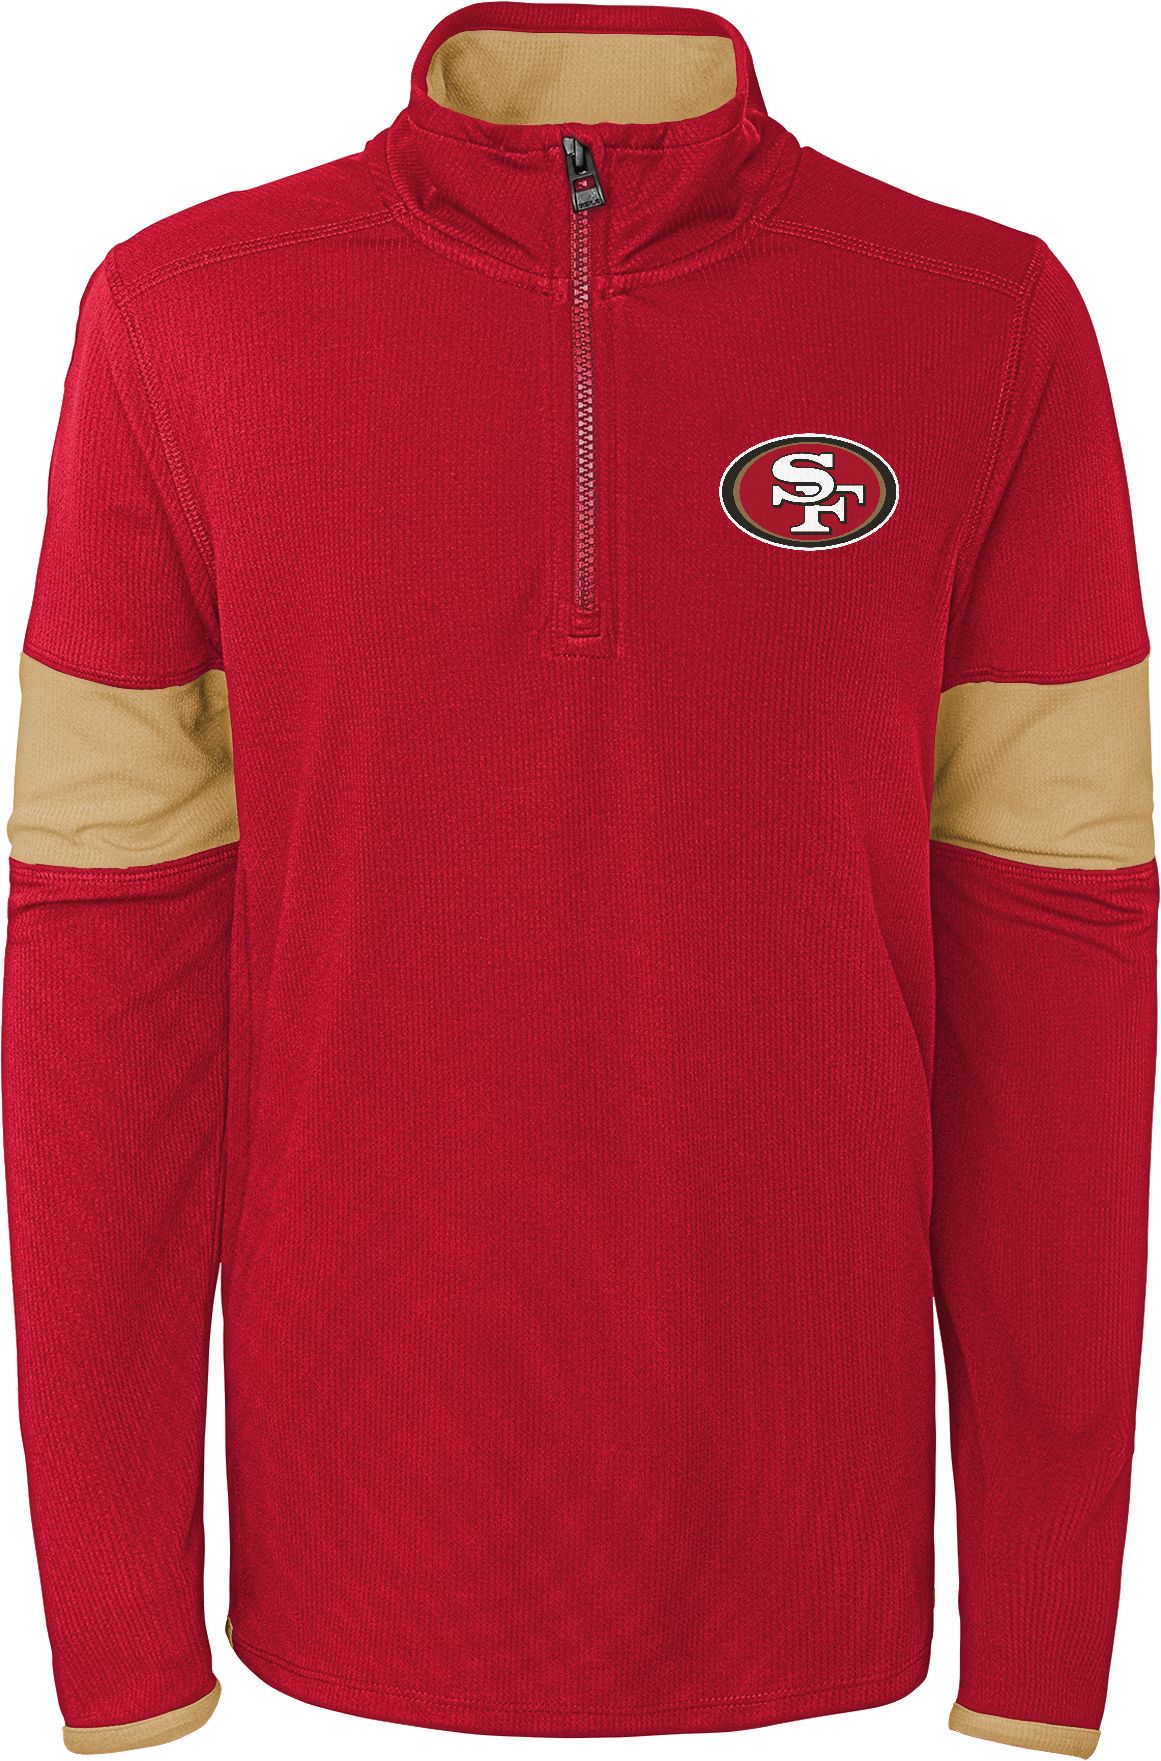 nfl team store 49ers